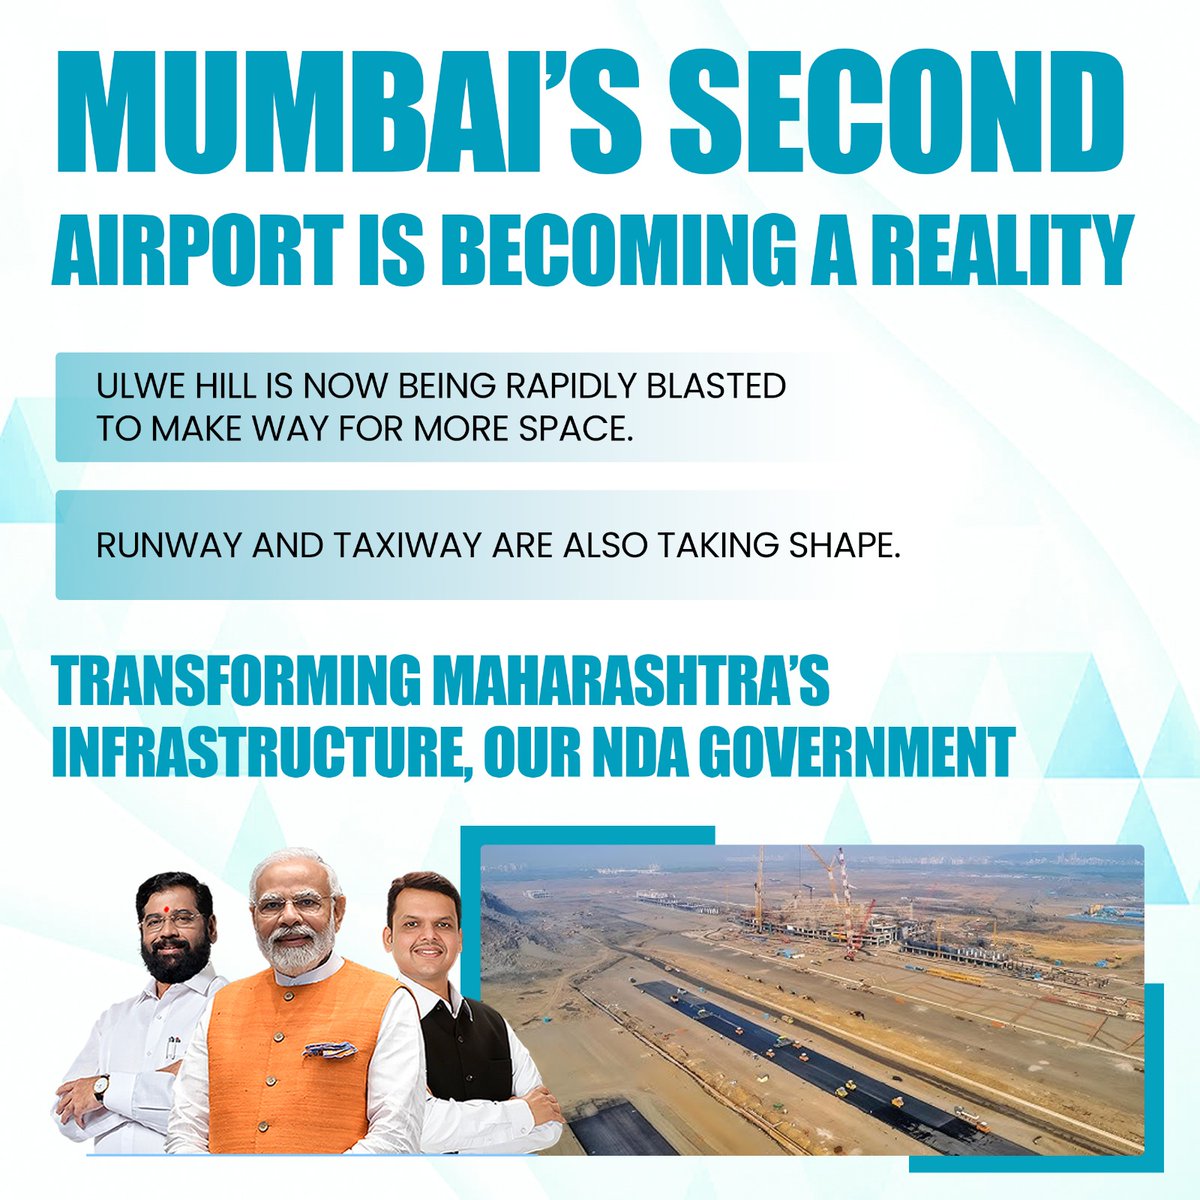 The transformation of Ulwe Hill into Mumbai's second airport is a testament to the city's growth and vision for the future. As runways and taxiways take shape, we commend CM Eknath Shinde Govt for their unwavering commitment to enhancing Mumbai's connectivity